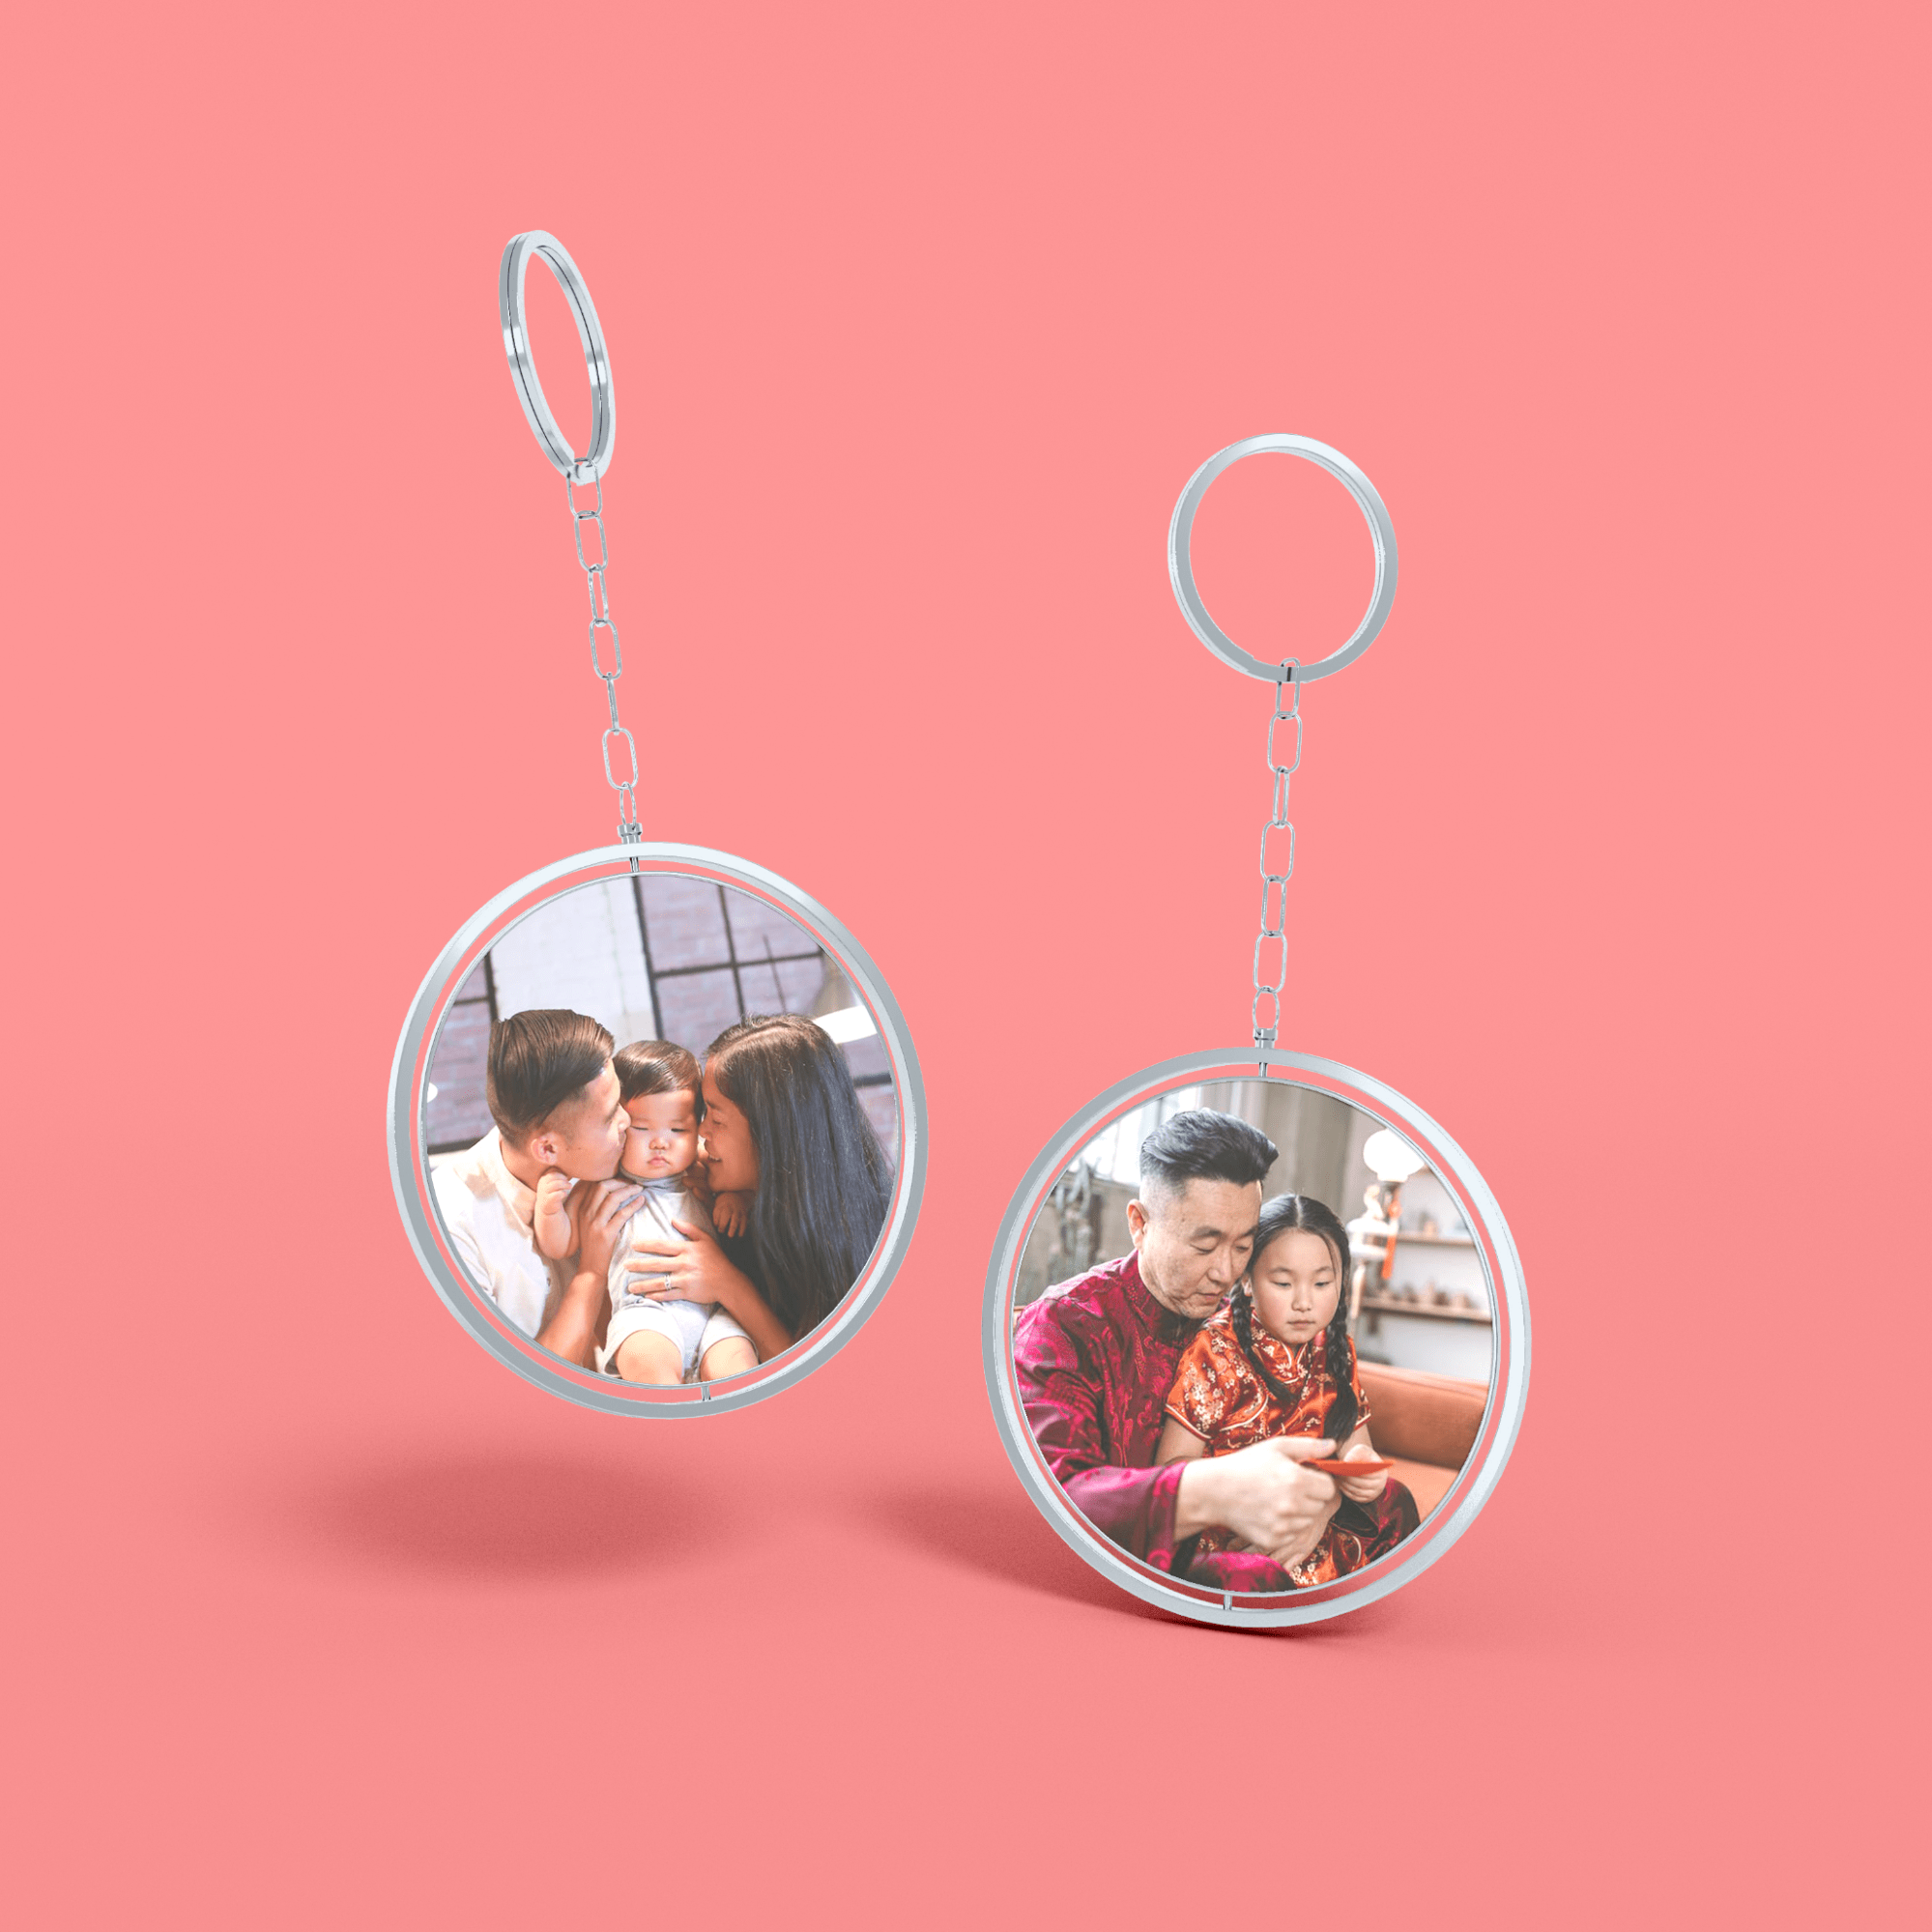 Two personalized keychain photos hanging from a chain against a vibrant pink background.